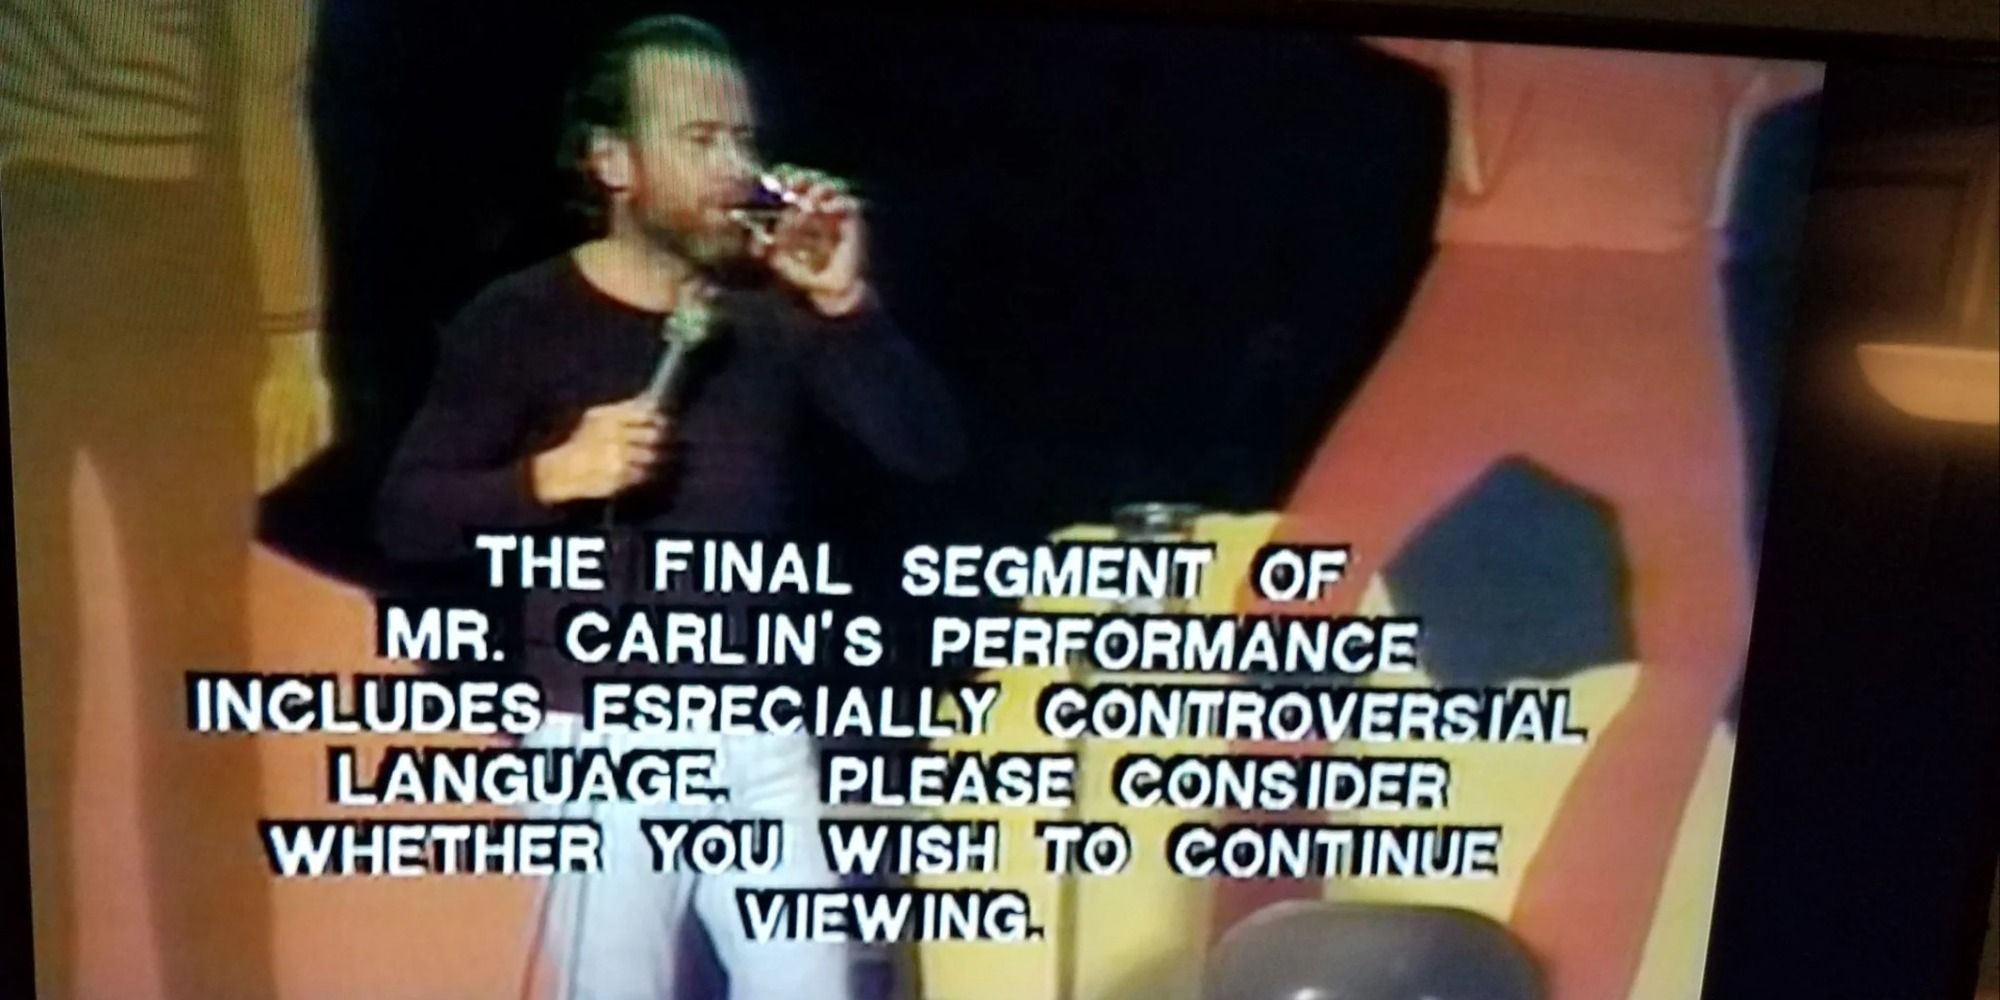 George Carlin at USC (1977) with language disclaimer